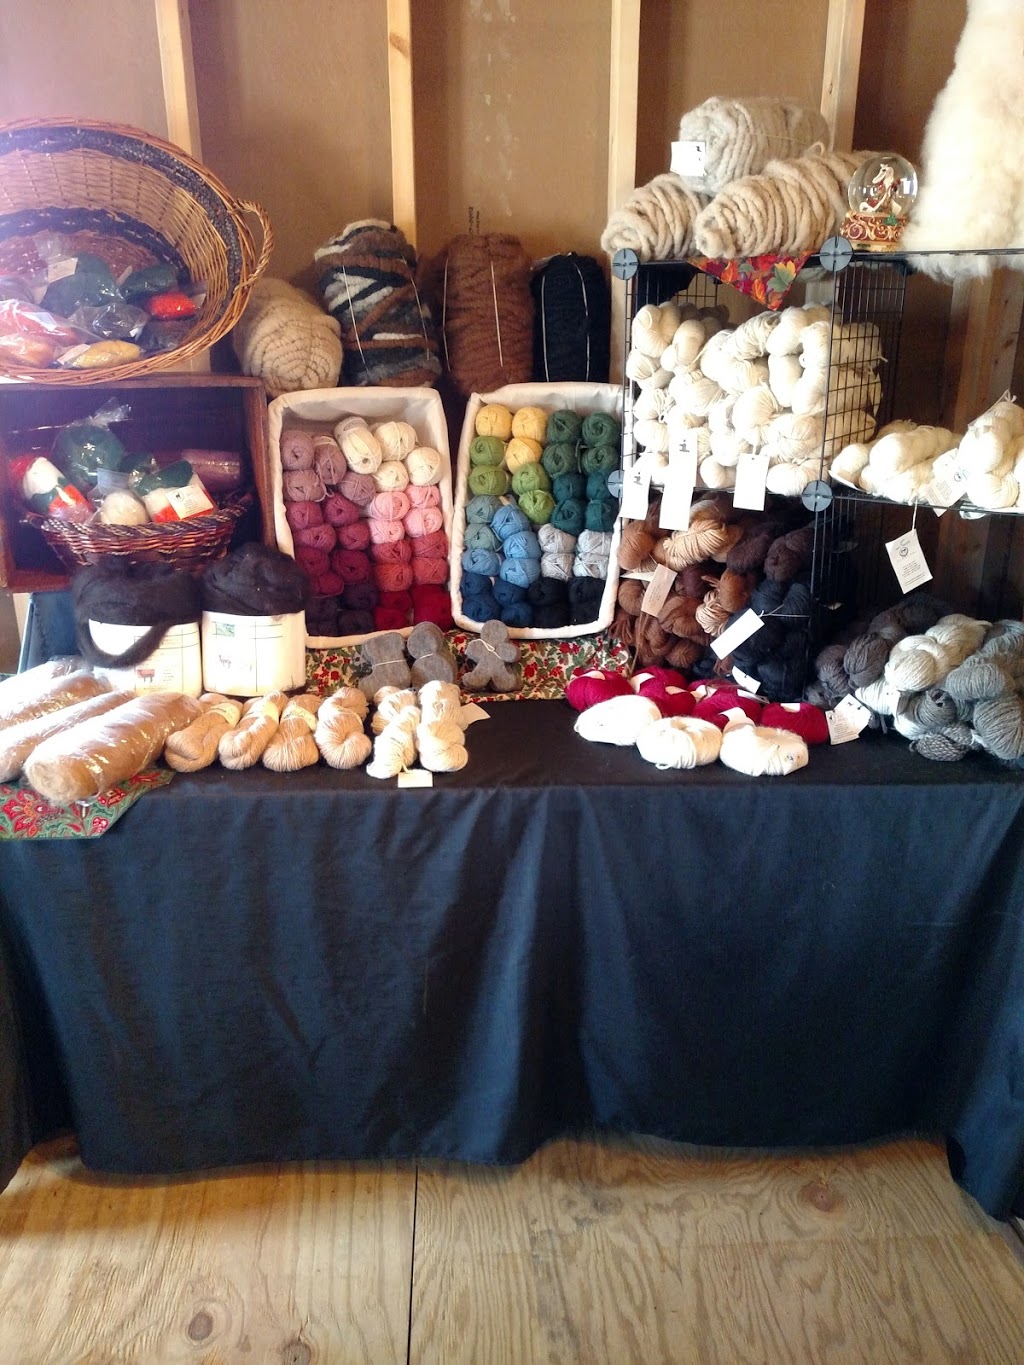 The Great Alpaca Place | 16800 Cowley Rd, Grafton, OH 44044 | Phone: (440) 477-4300